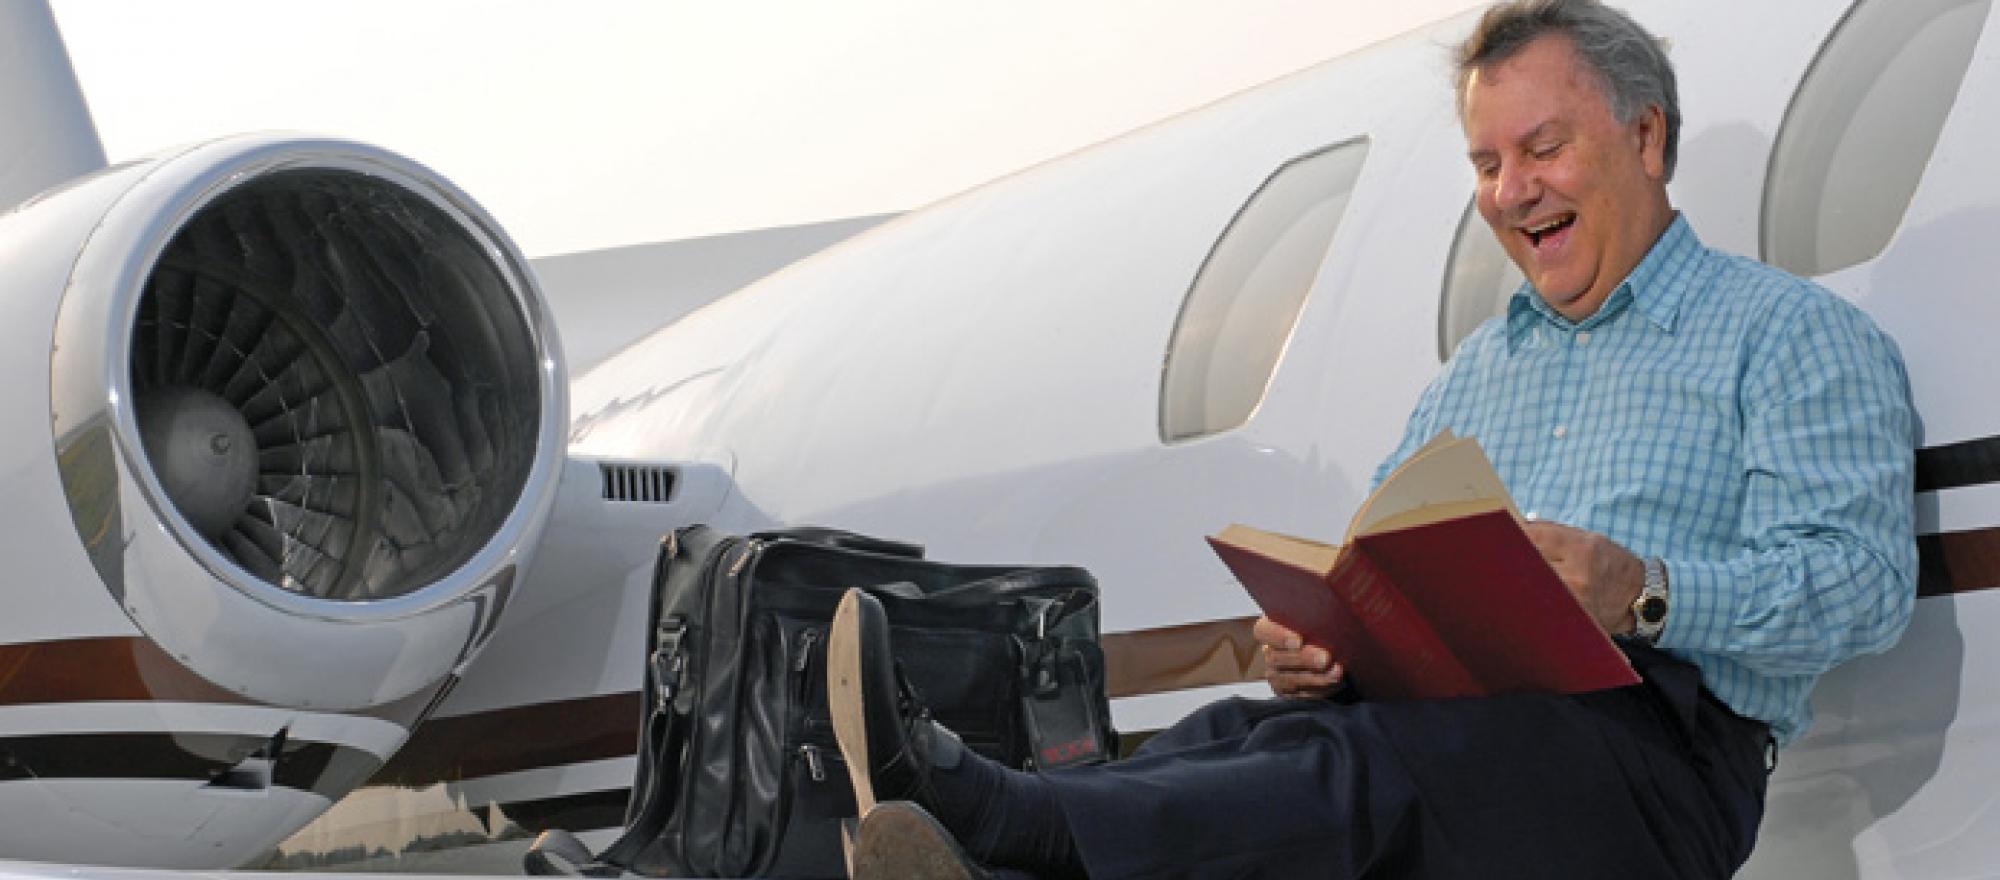 On the ground, Banks’ Citation S/II doubles as a lounge chair.